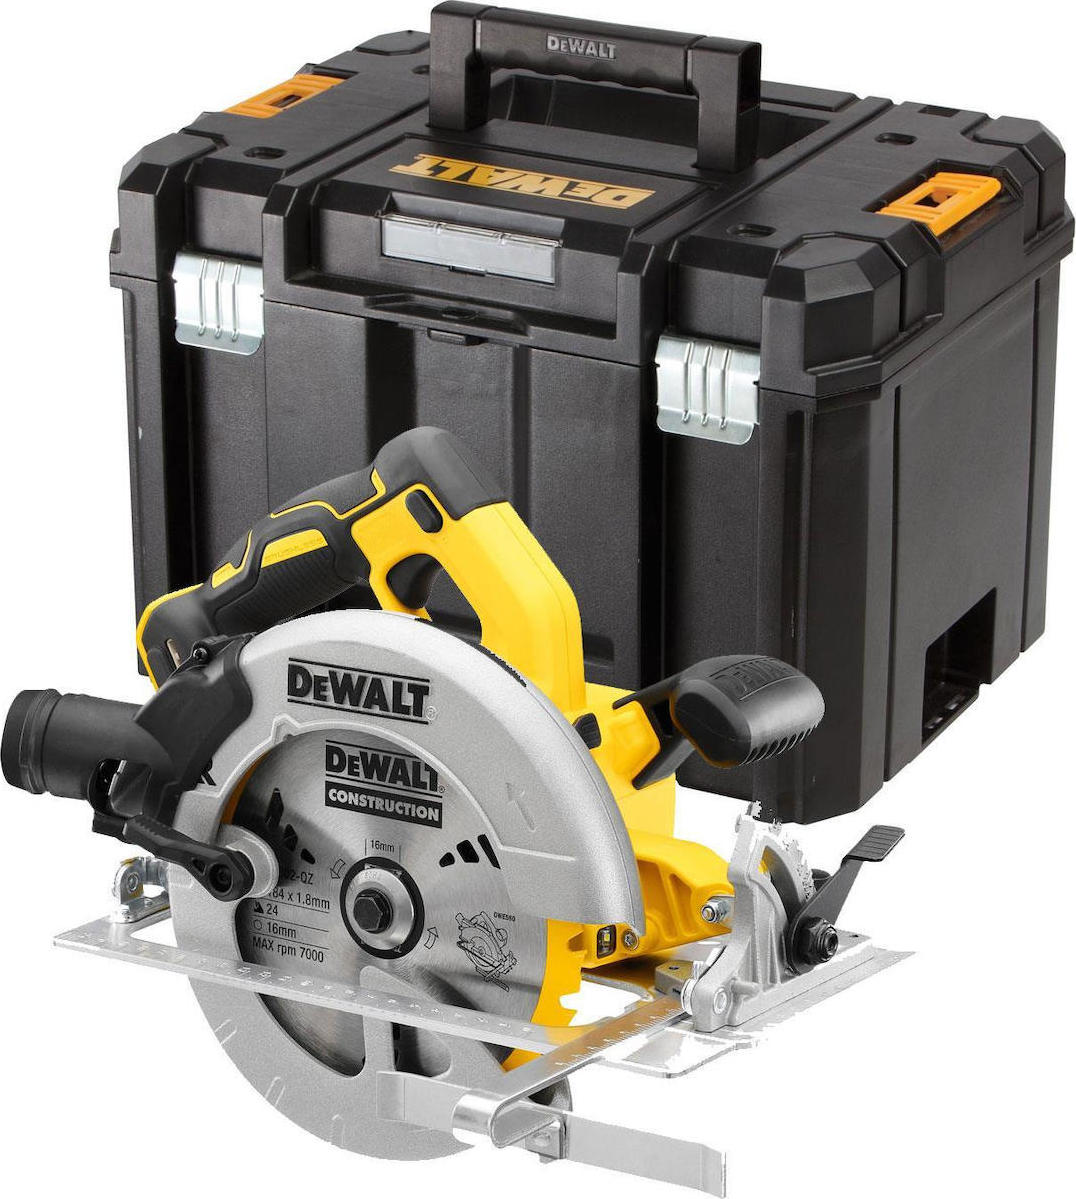 DEWALT 18V Brushless Circular Saw 184mm (battery and charger not included) T STAK